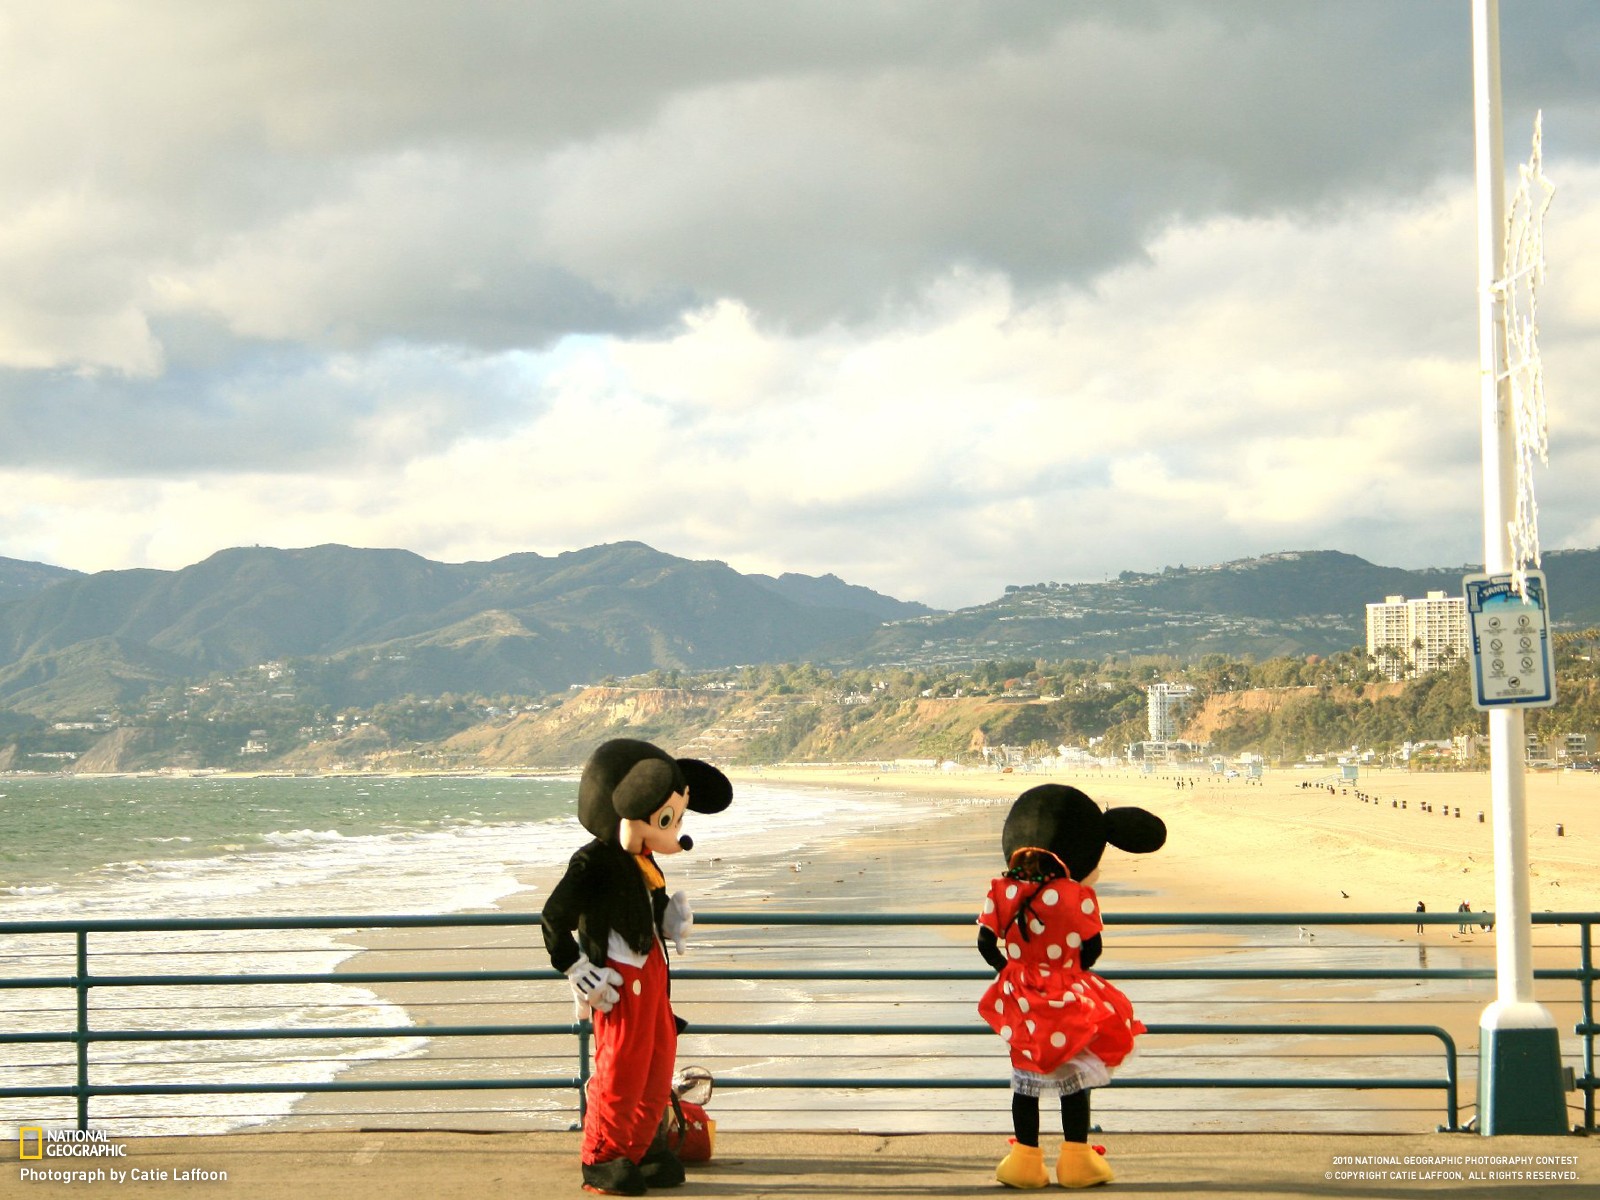 General 1600x1200 Mickey Mouse Minnie Mouse landscape beach